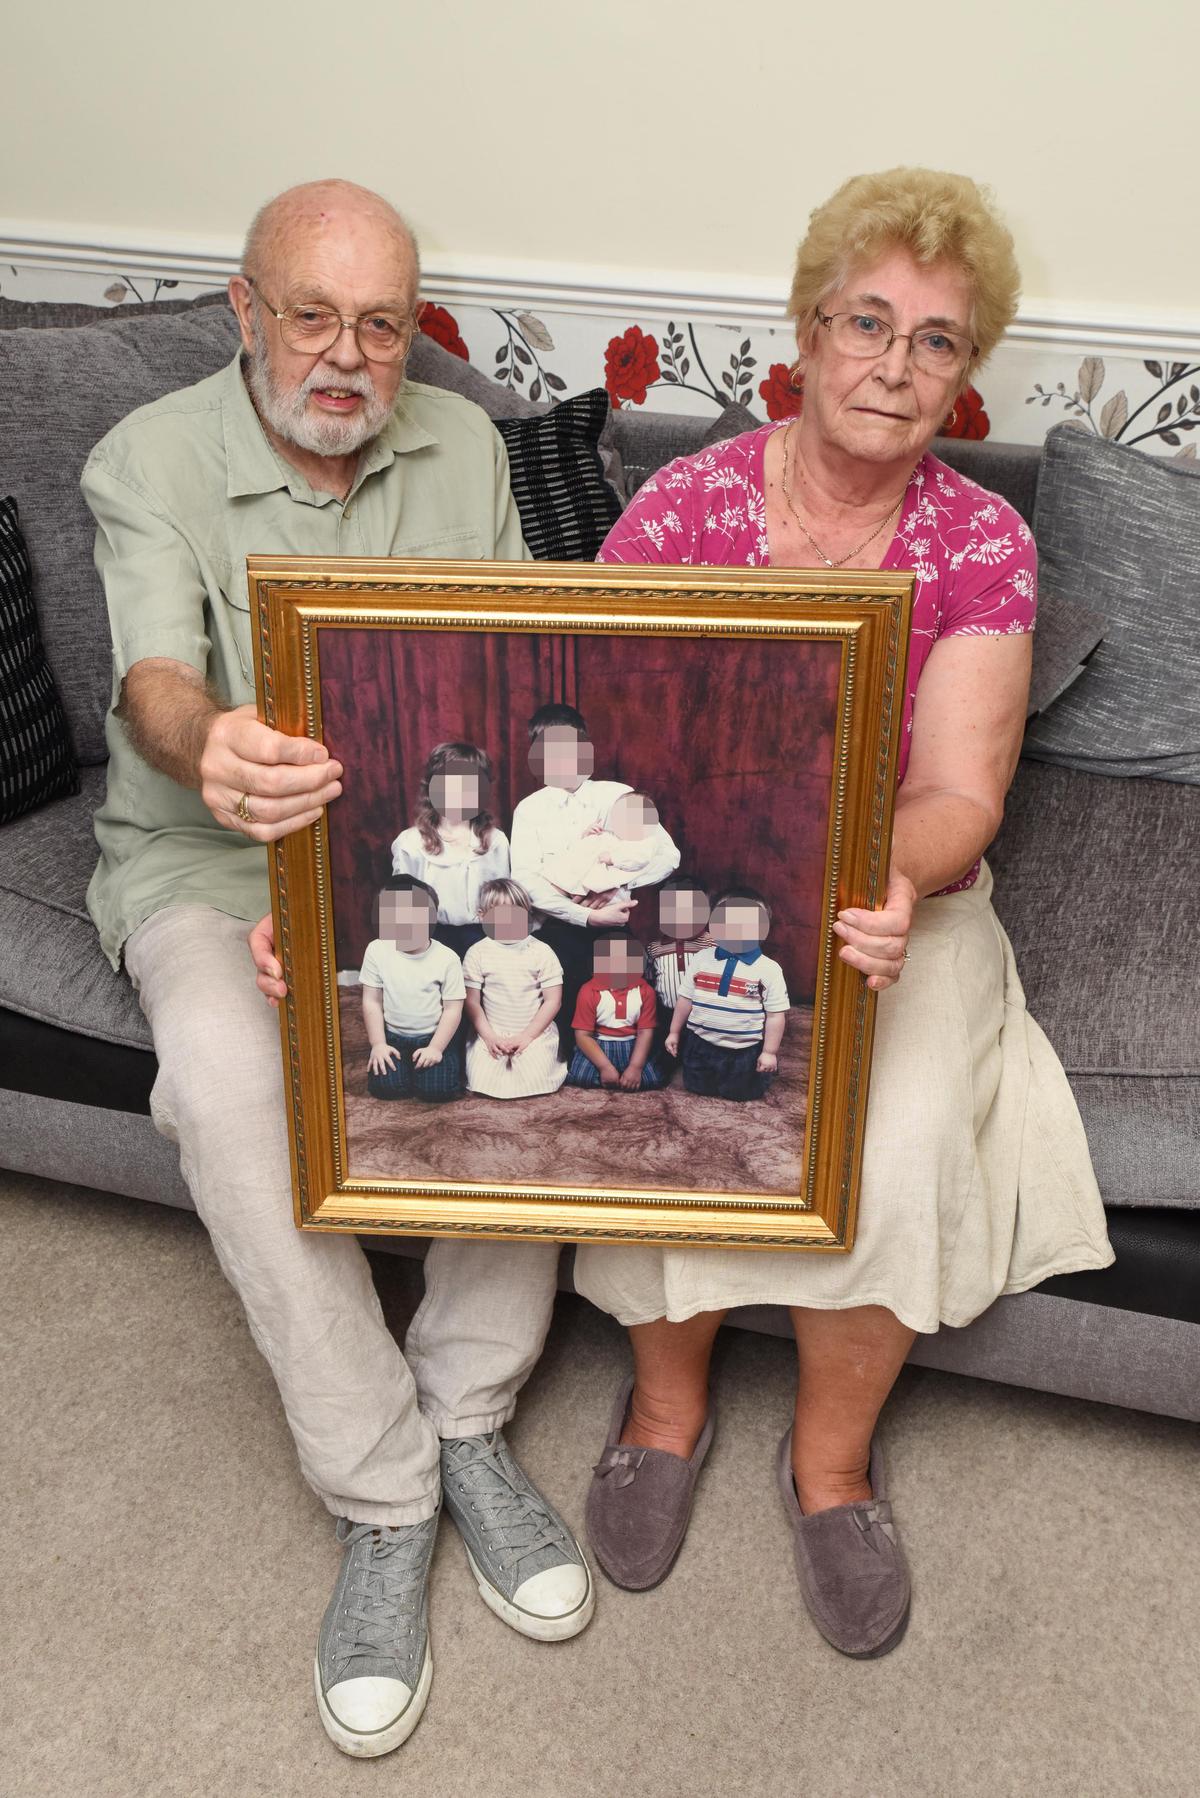 William Foster and his wife, Jean, holding a pixelated image of some of their fostered children on June 17, 2019. (Caters News)